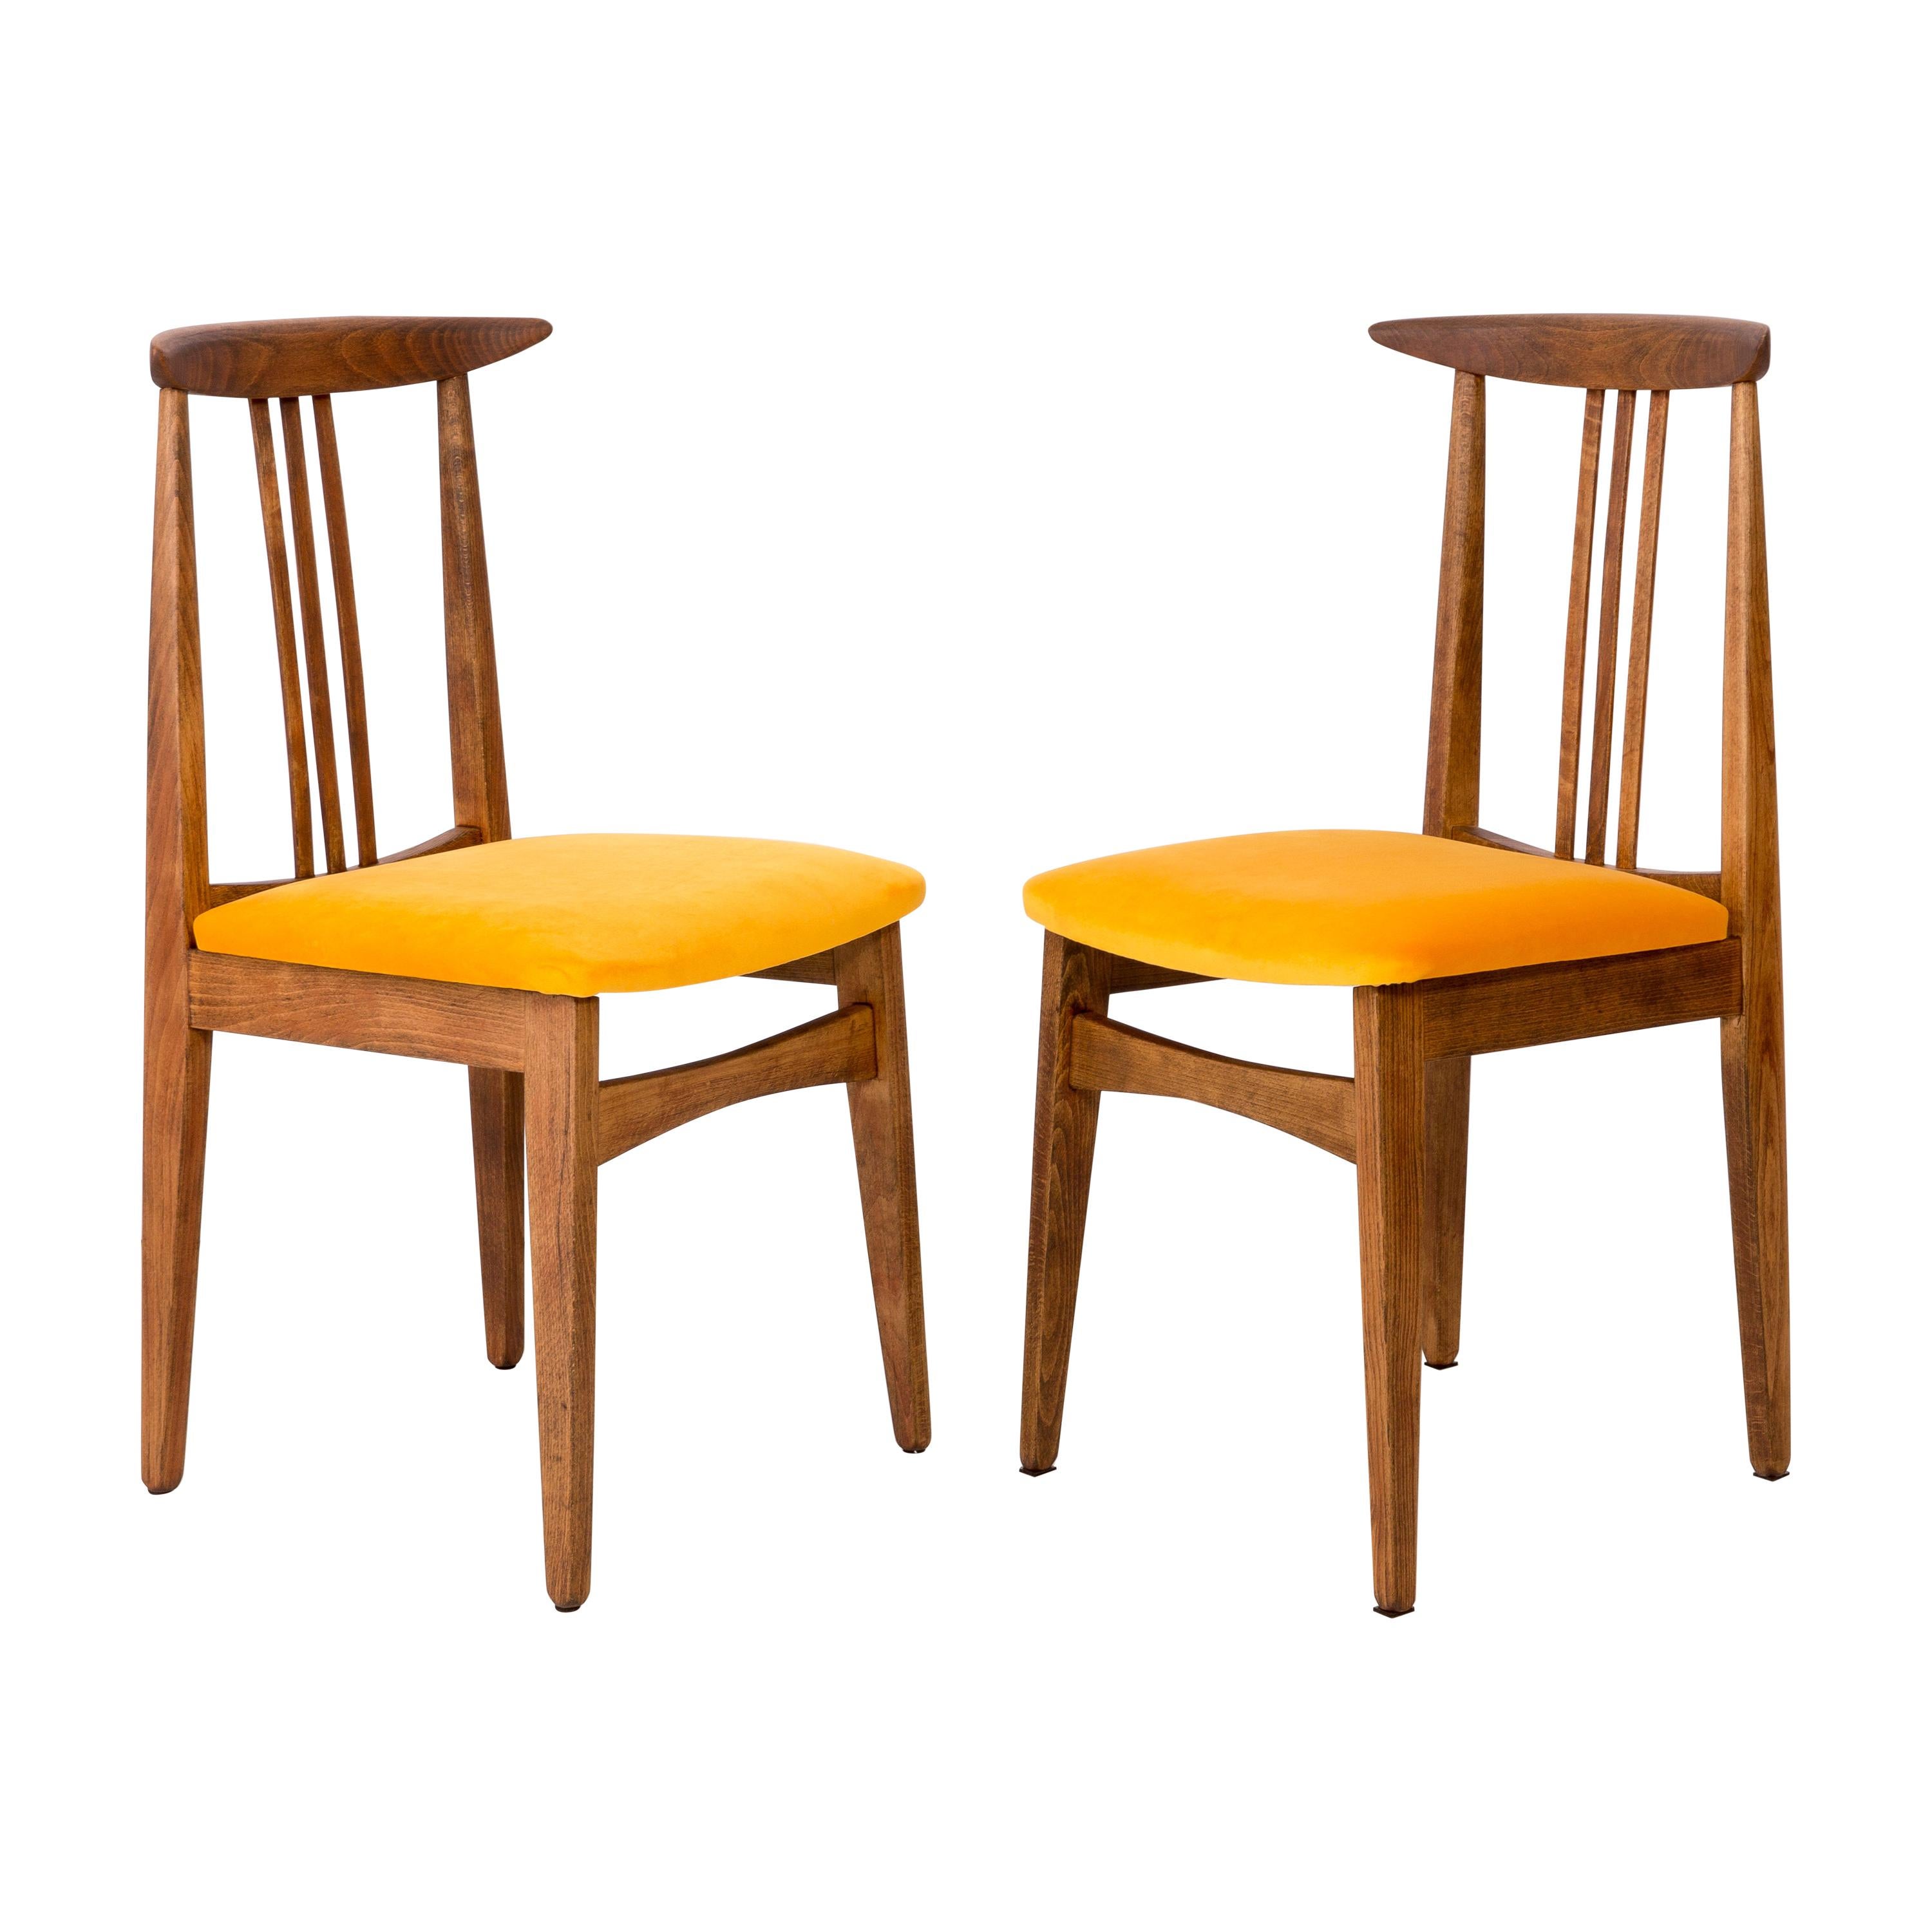 Set of Two Yellow Chairs, by Zielinski, Poland, 1960s For Sale